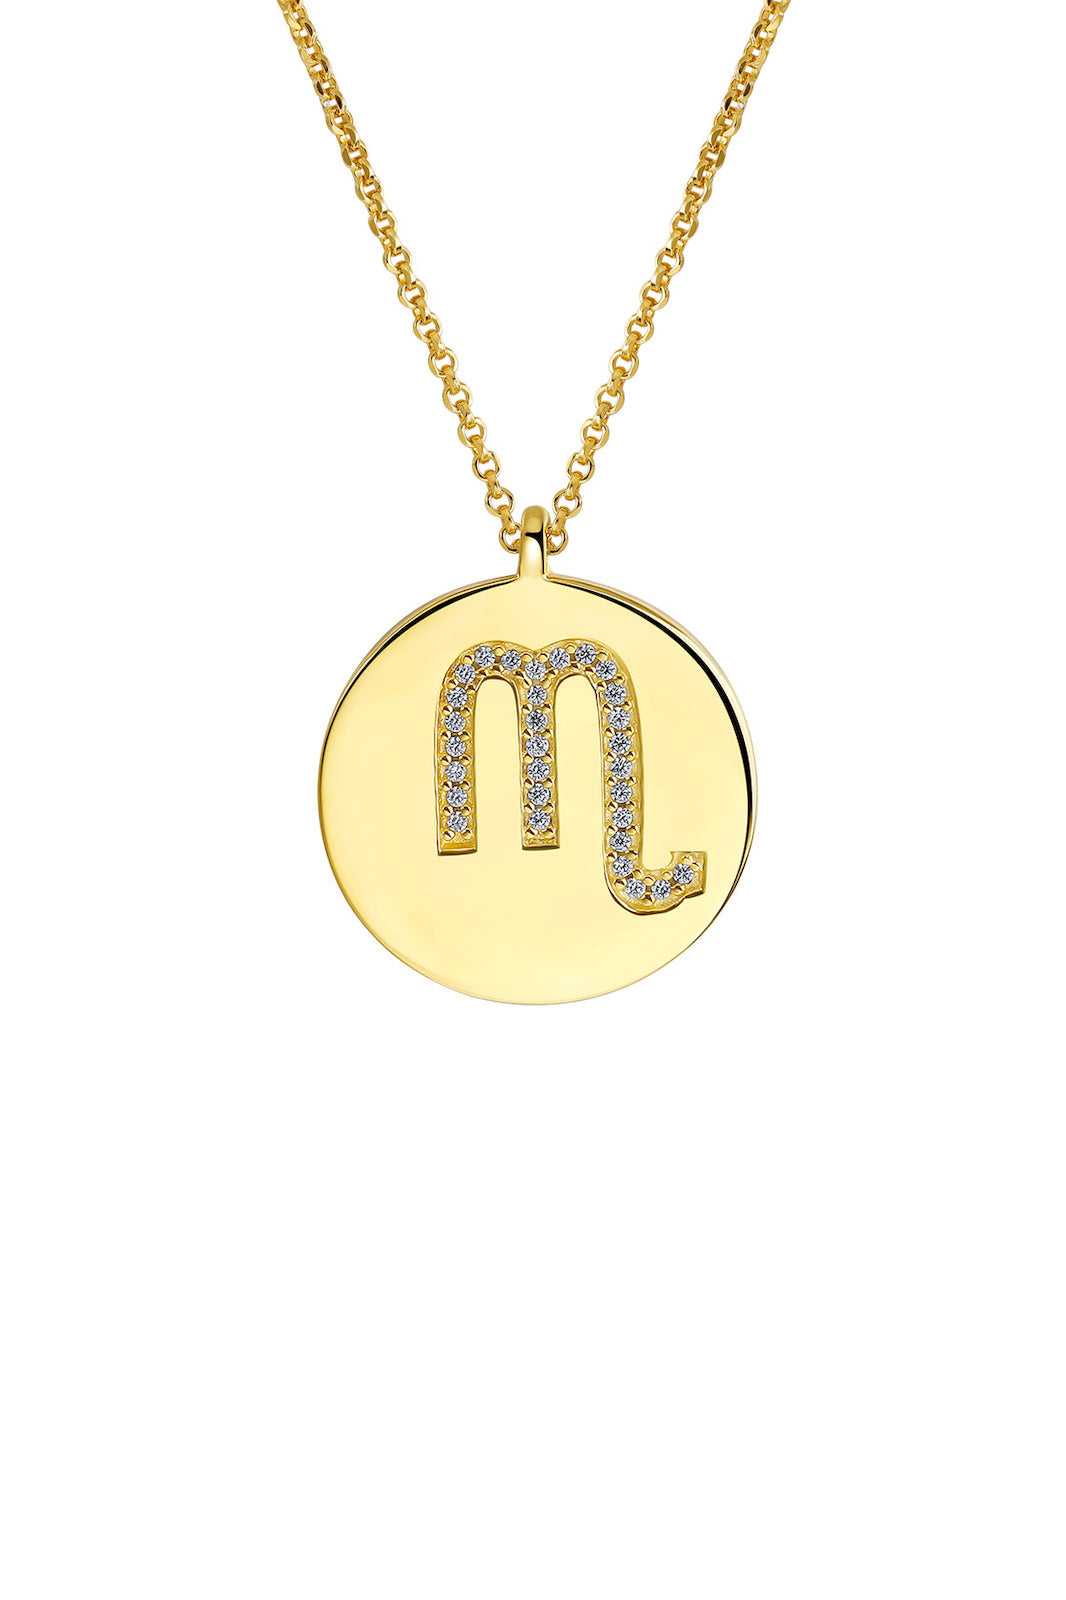 Gold Plated Silver Zodiac Necklace - Scorpio Side View